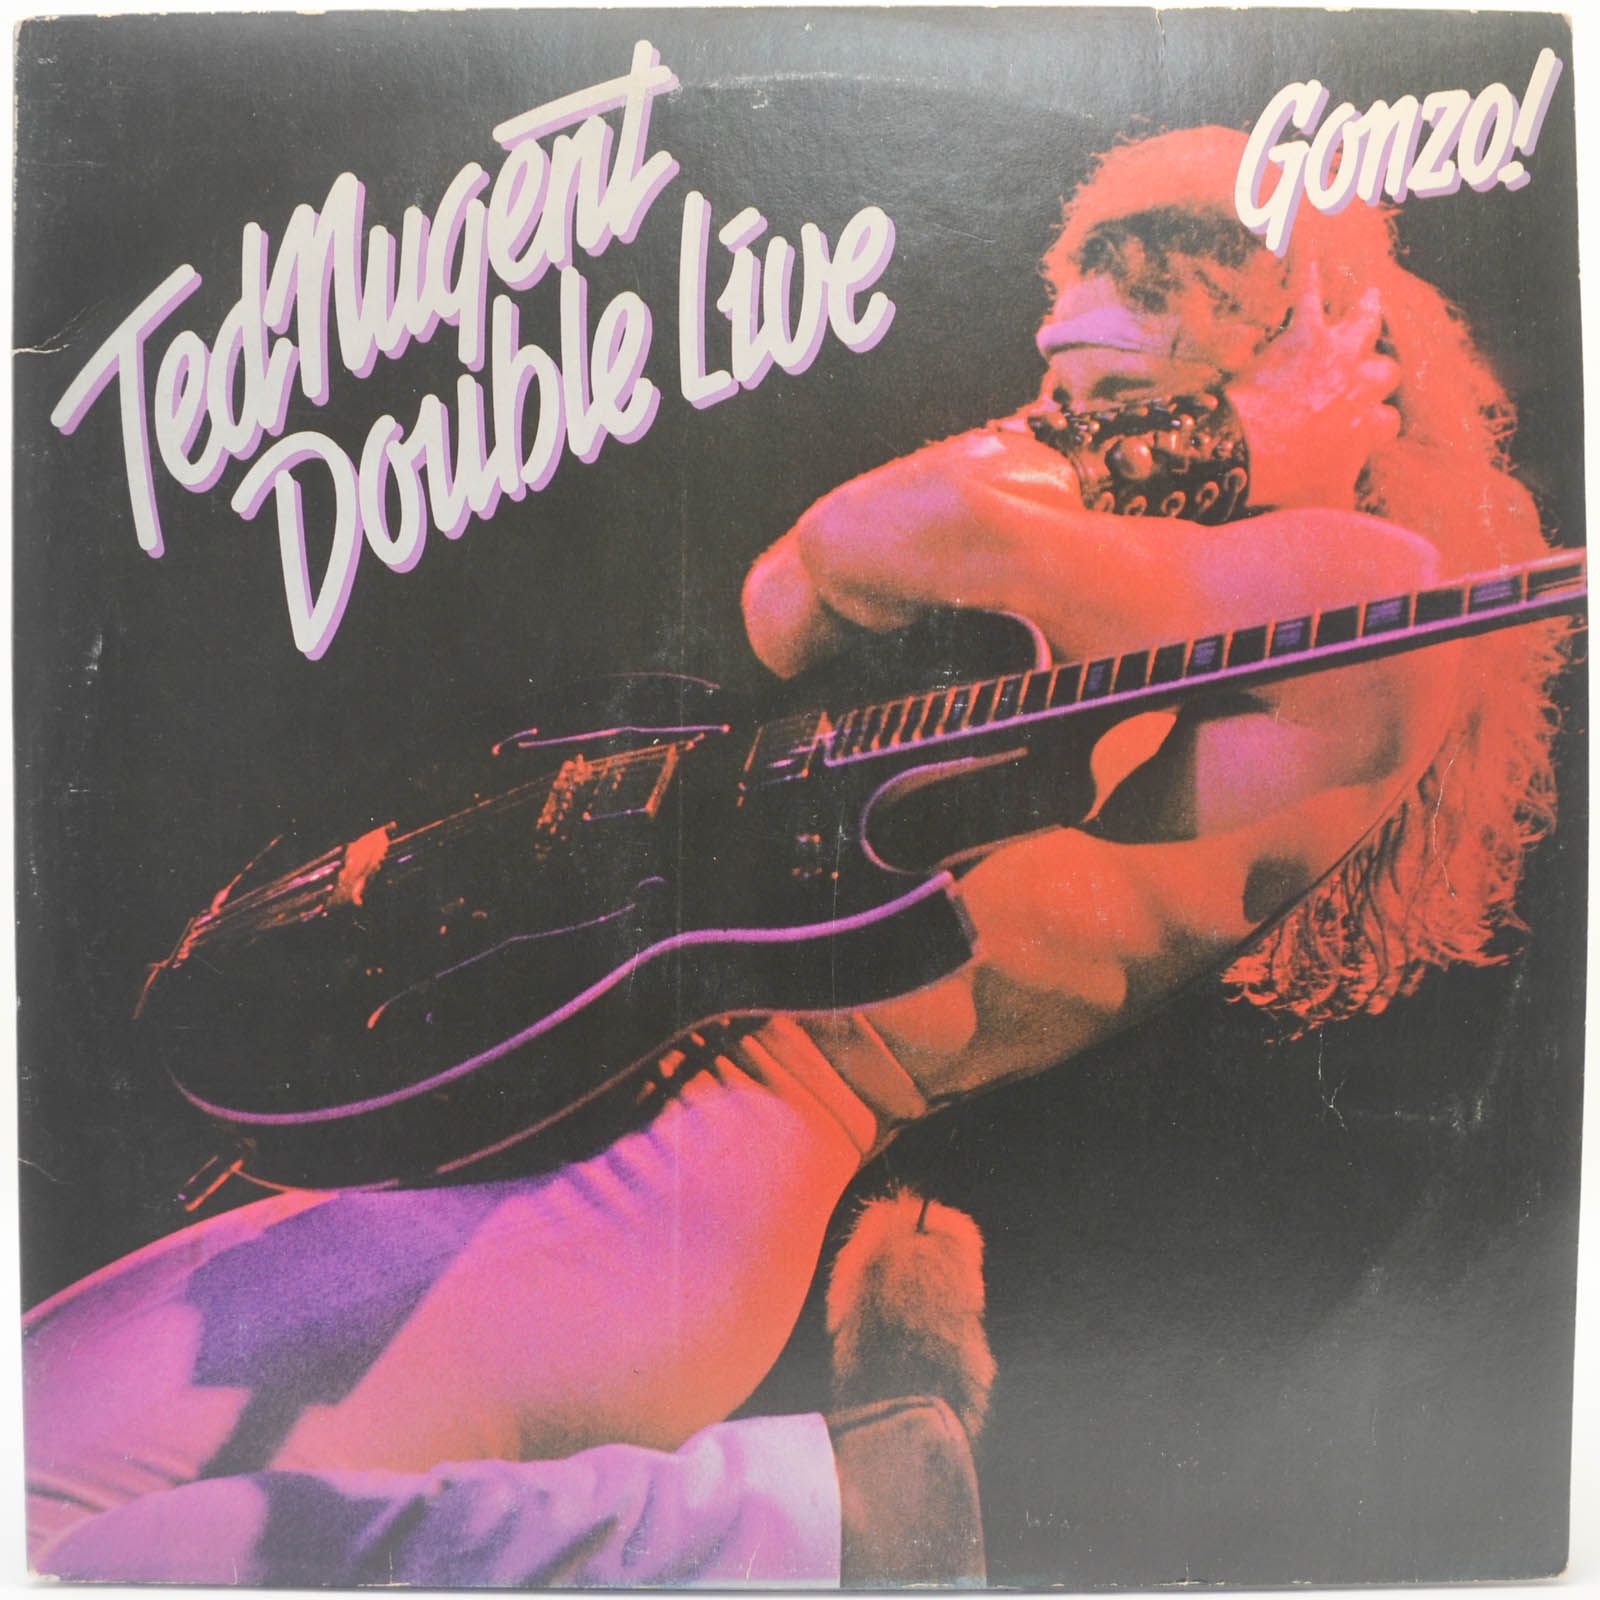 Ted Nugent — Double Live Gonzo! (2LP, USA), 1978